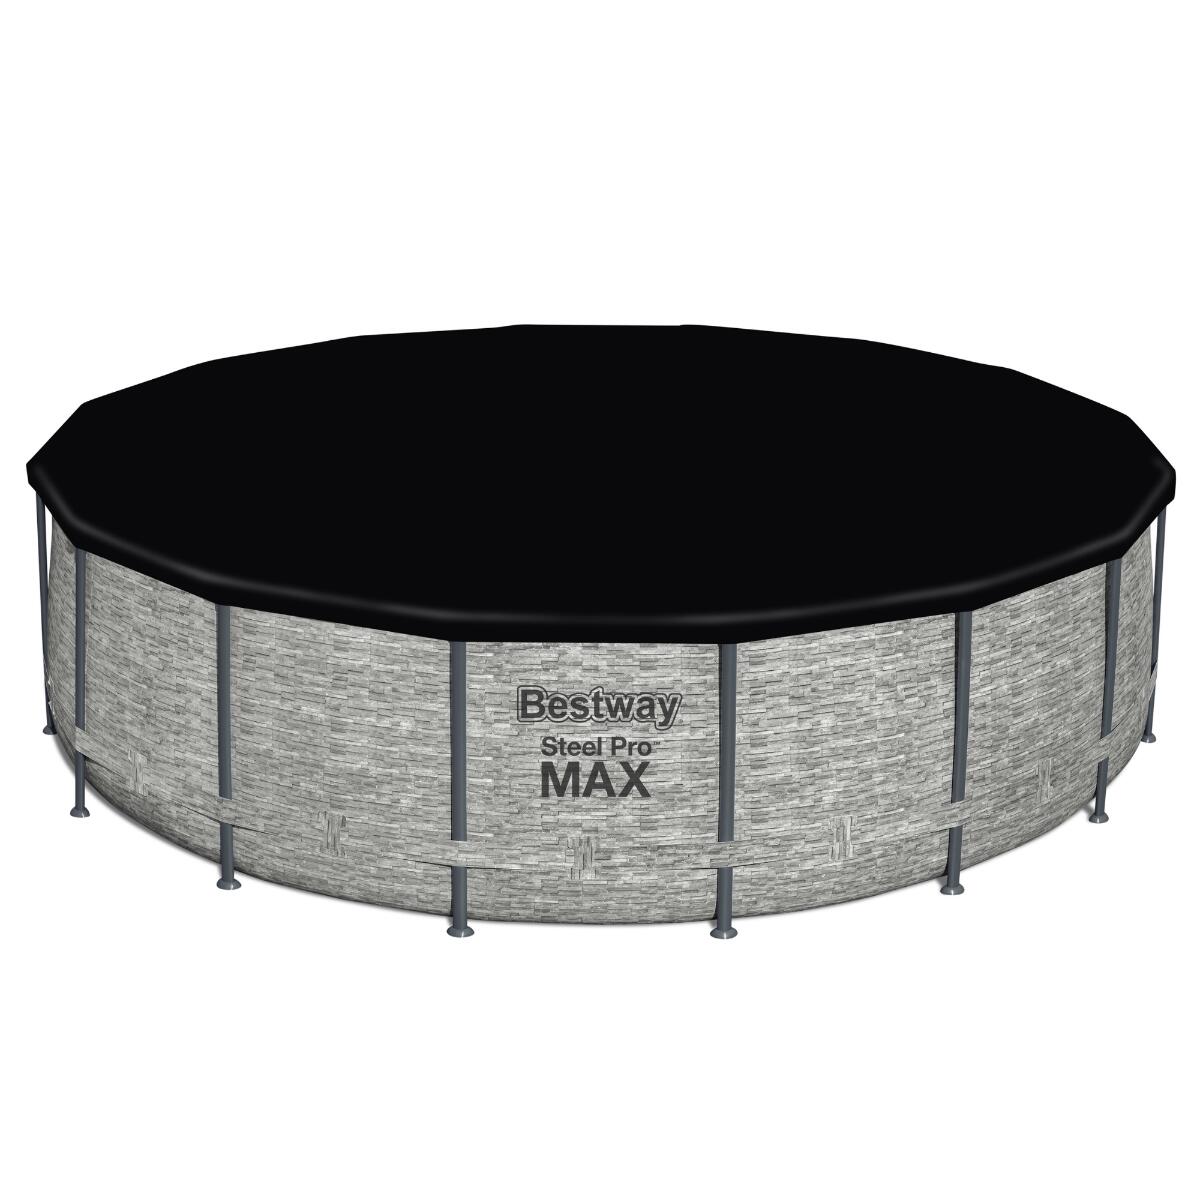 Bestway 16ft x 48" Steel Pro MAX Round Above Ground Swimming Pool 4/7